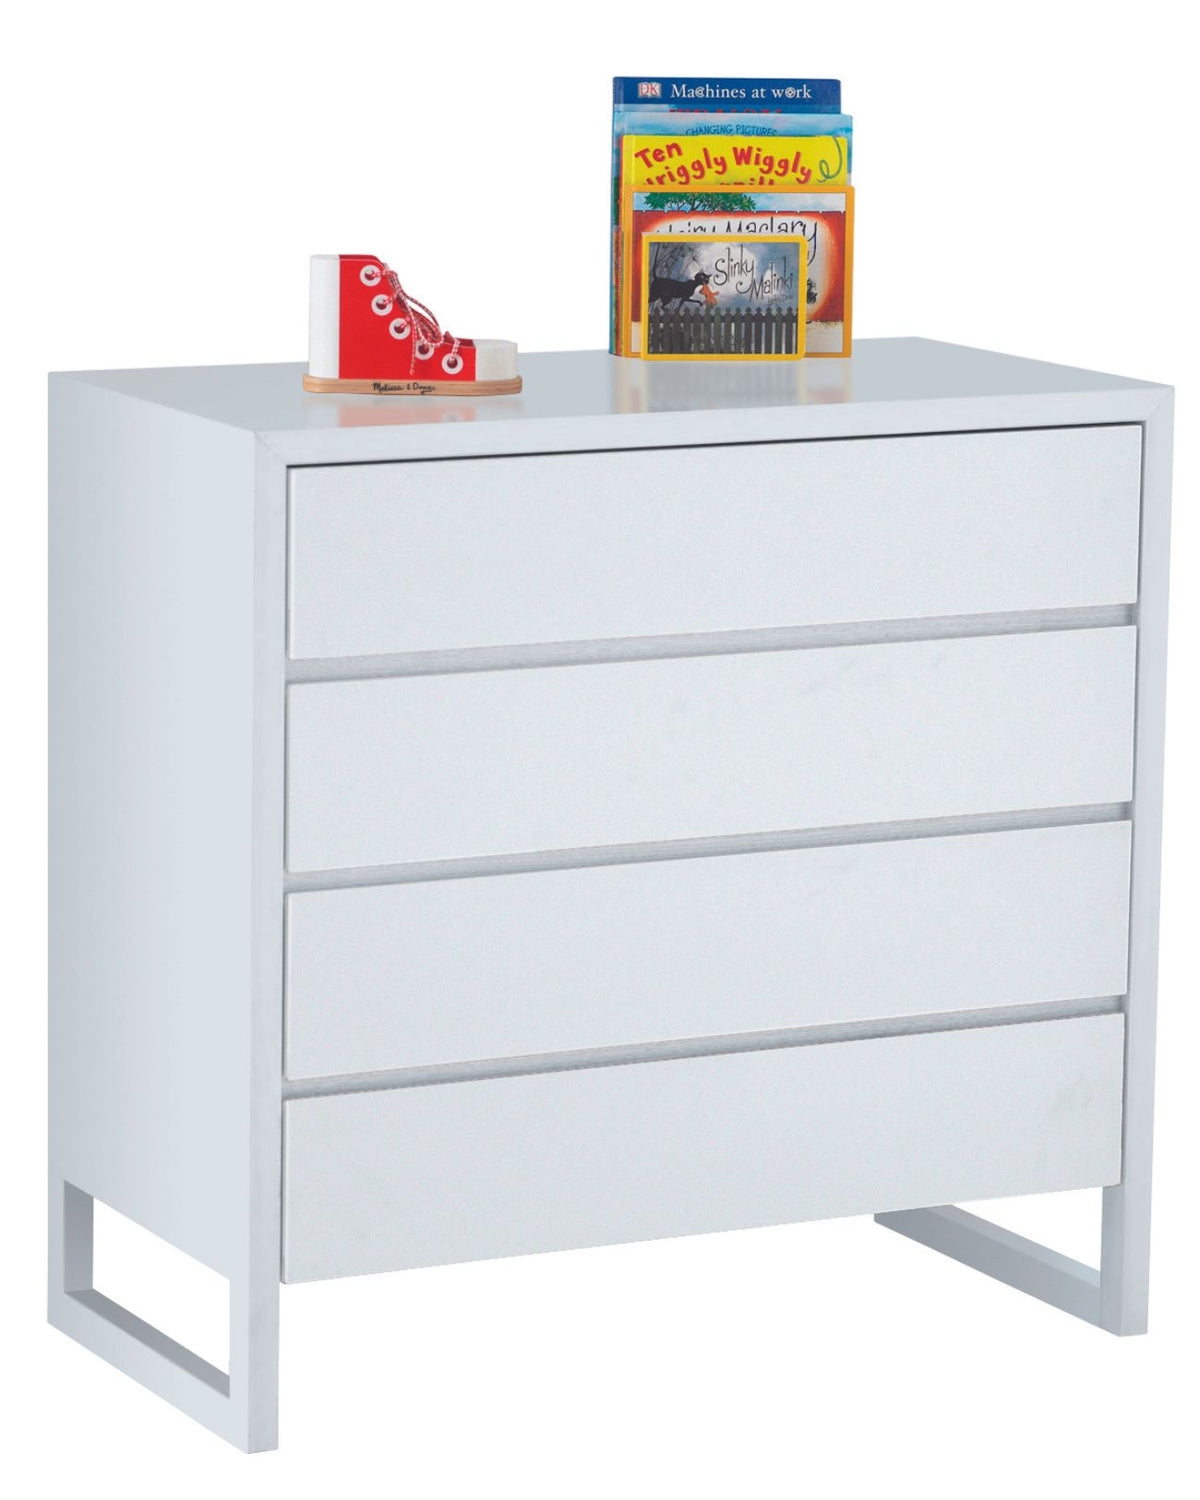 The Colour Box Chest of Drawers features concealed intricate mitred joinery with legs that flow into a continuous wrap to create classic simplicity.   CONDITION: New COLOUR: White  Available NOW for immediate delivery.  95H x 50D x 100W cm  Designed by Lilly & Lolly. Made in Australia. 10 year structural warranty.